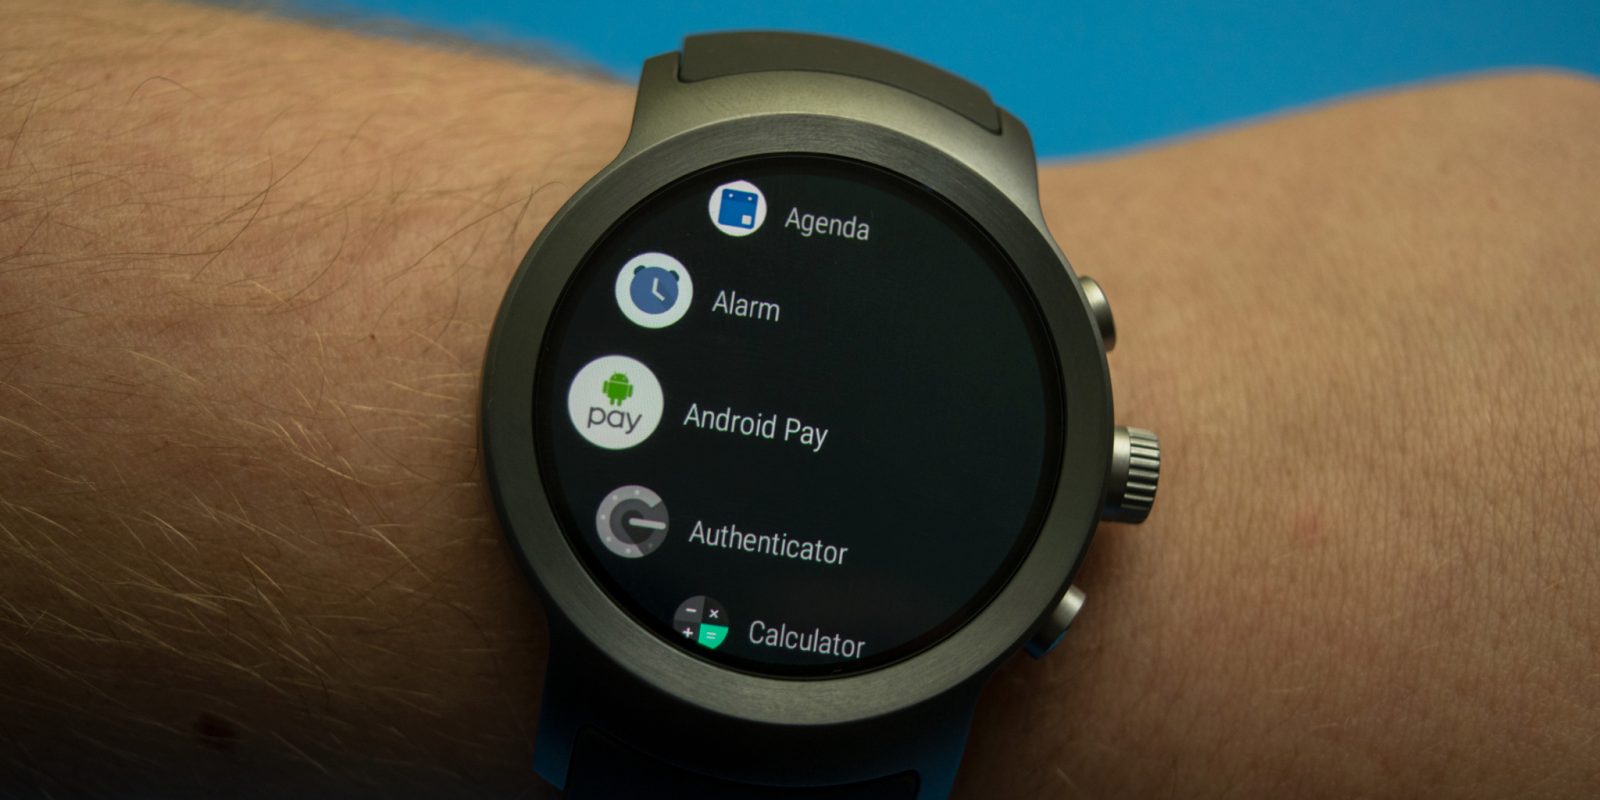 How to uninstall apps from smartwatch in Wear OS?